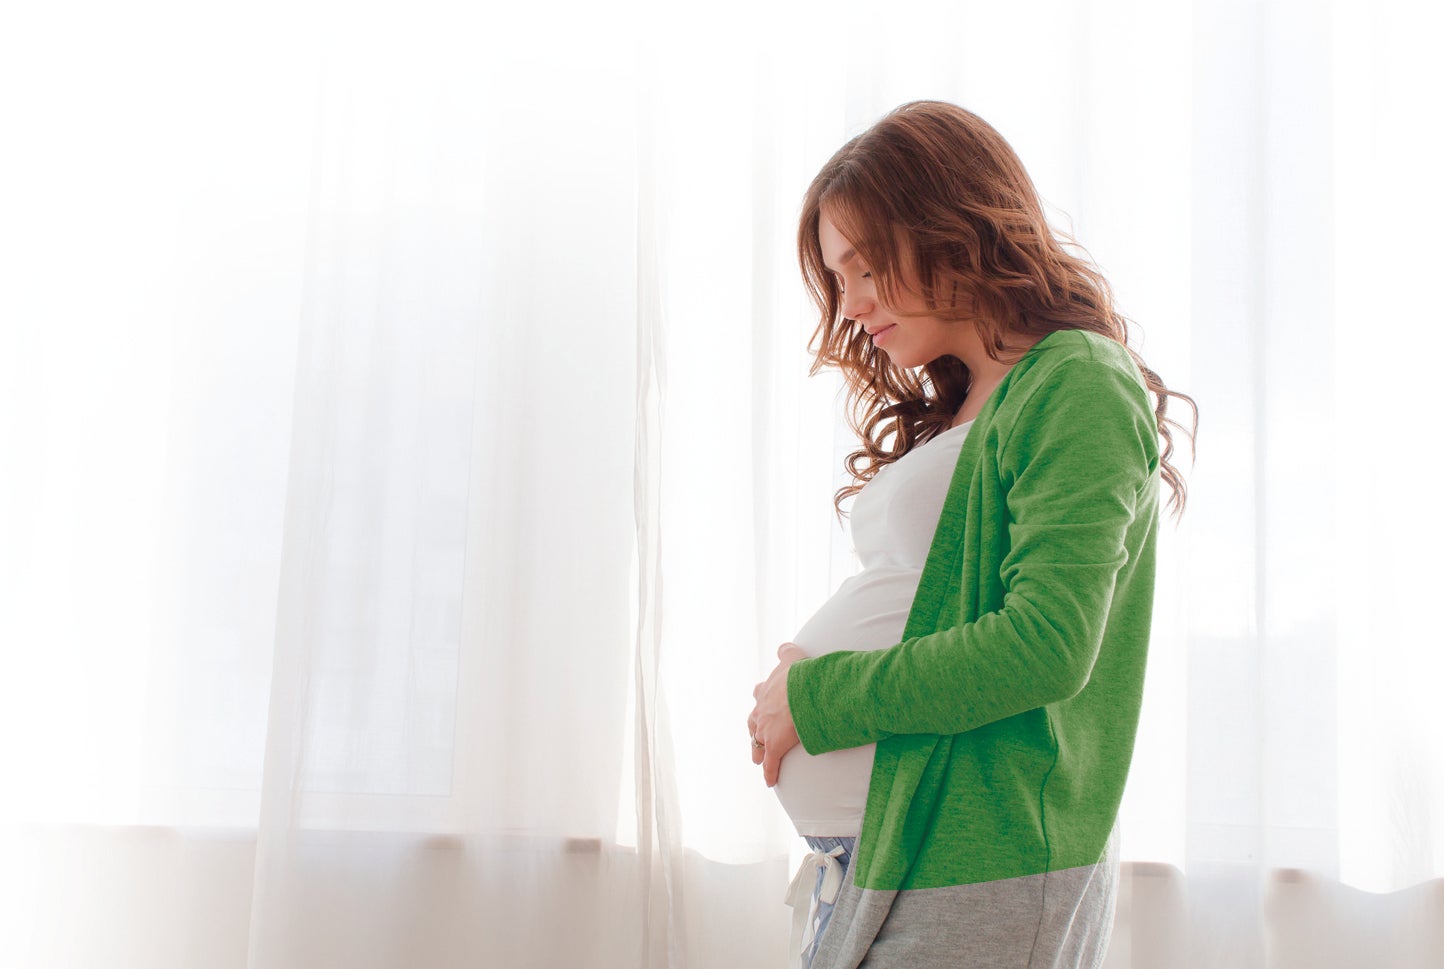 Pregnancy and Oral Care